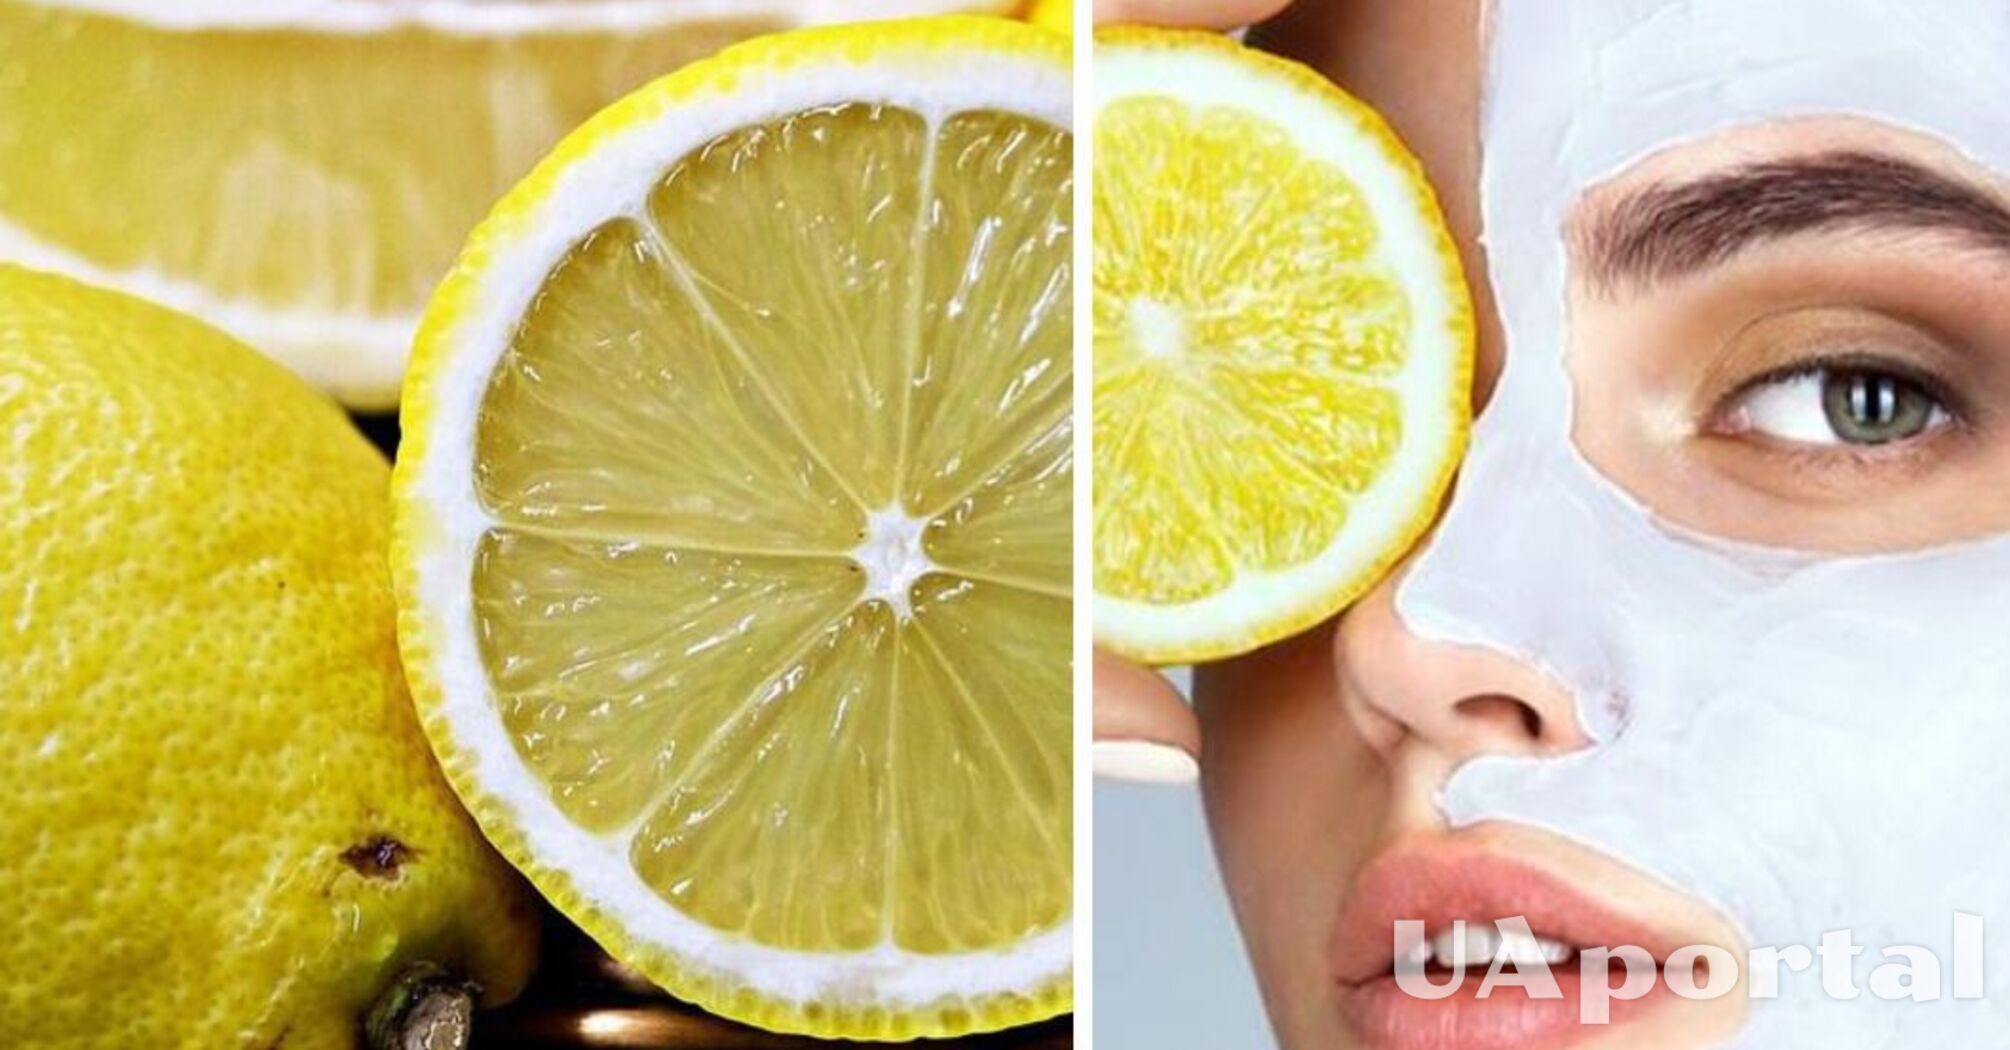 Neutralizes rashes and whitens: the benefits of lemon juice for the skin